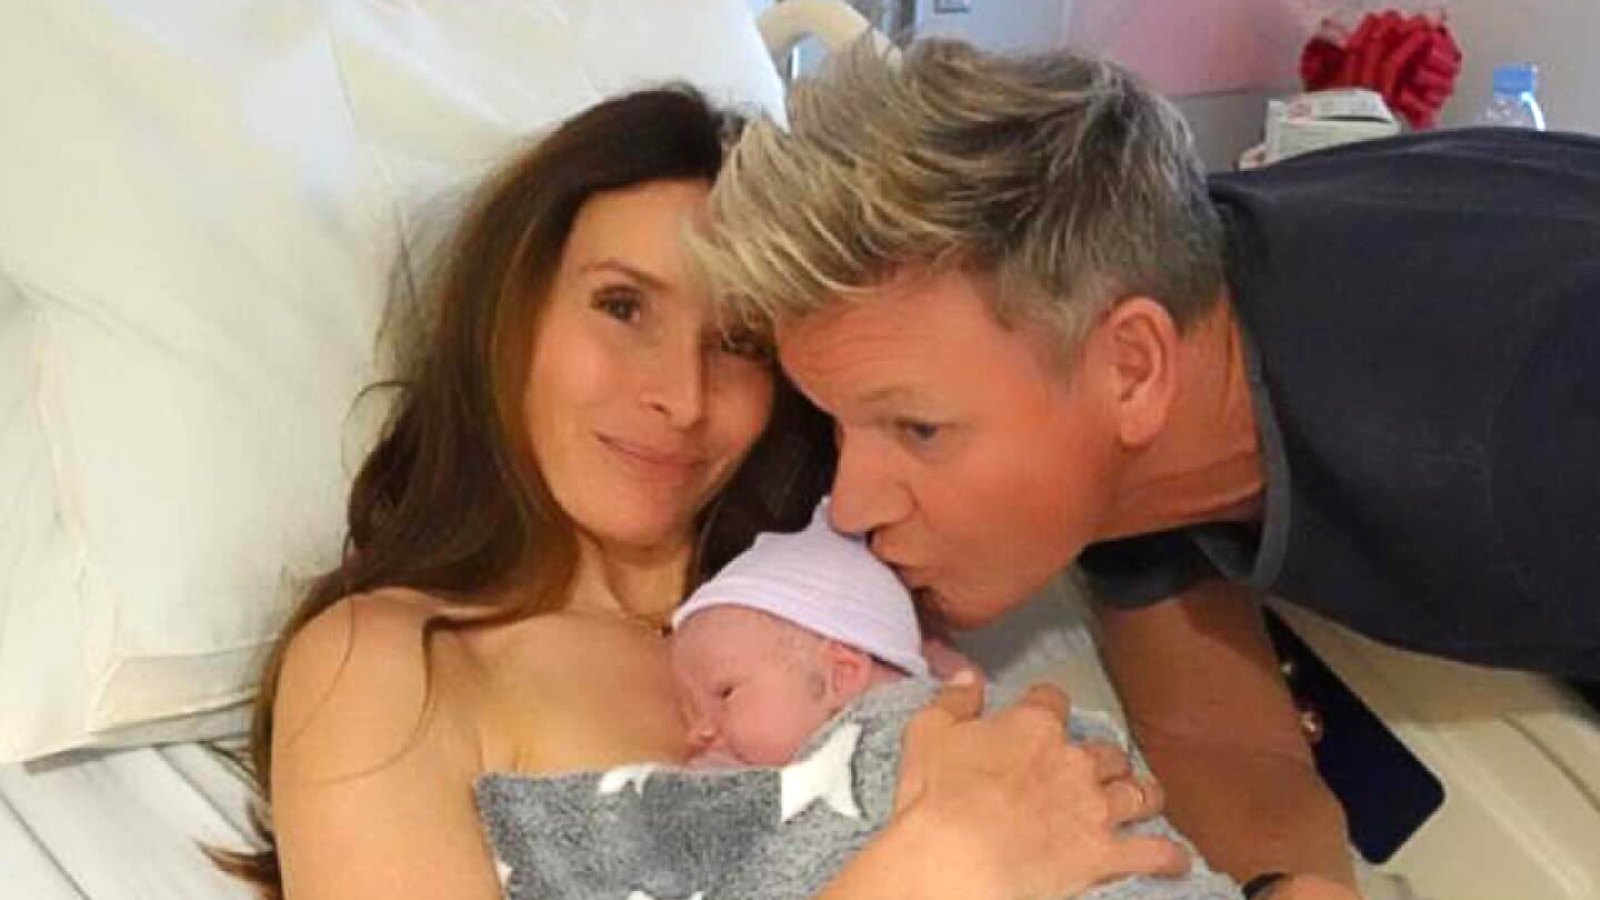 Gordon Ramsay and Wife Tana Welcome Baby No. 6 After Miscarriage: 'One More Bundle of Love'